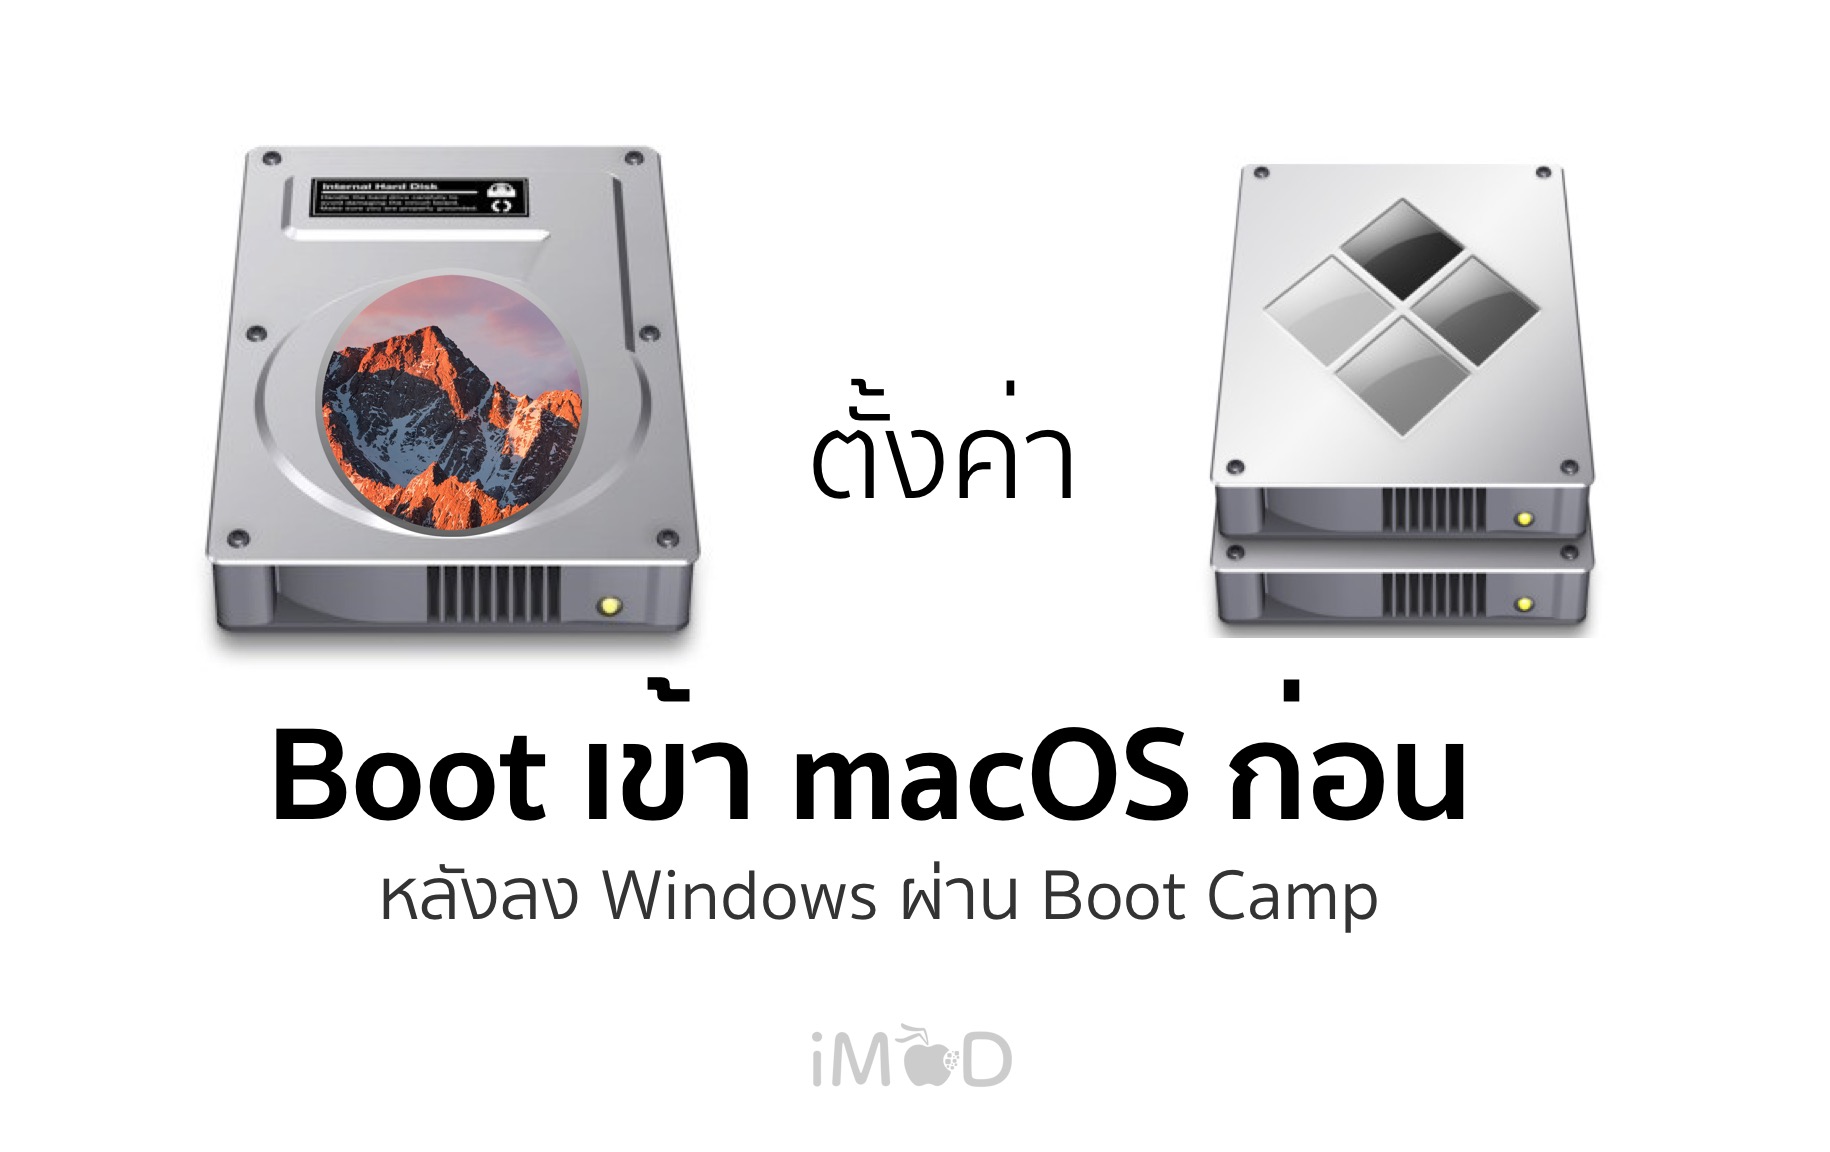 boot imac operating system